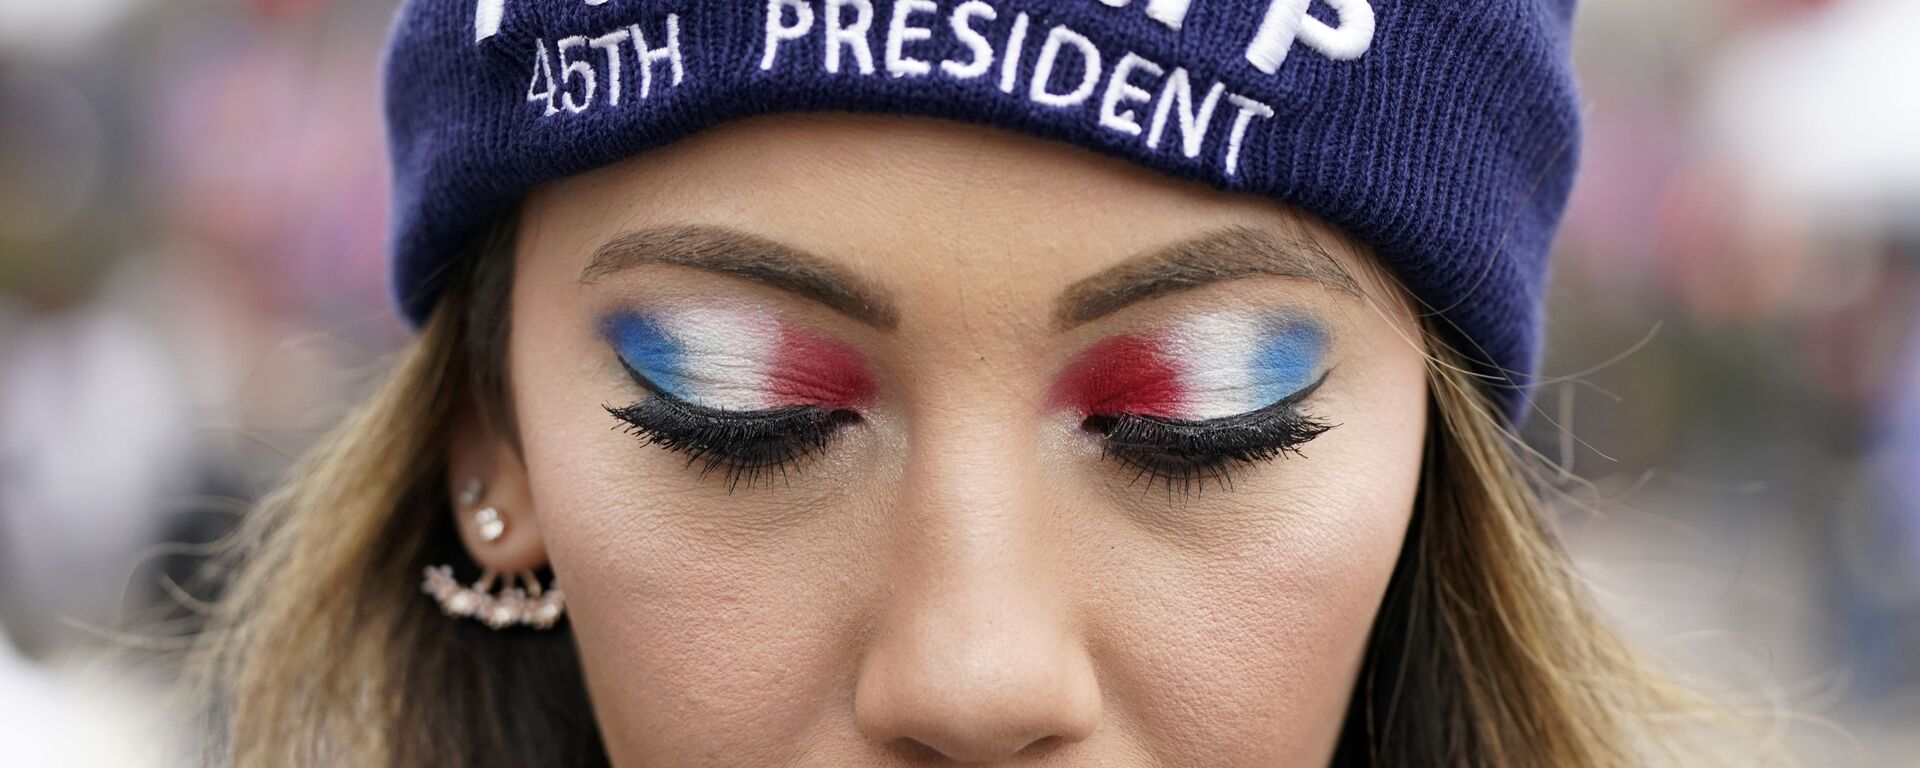 A person attends a rally at Freedom Plaza Tuesday, Jan. 5, 2021, in Washington, in support of President Donald Trump.  - Sputnik International, 1920, 13.01.2021